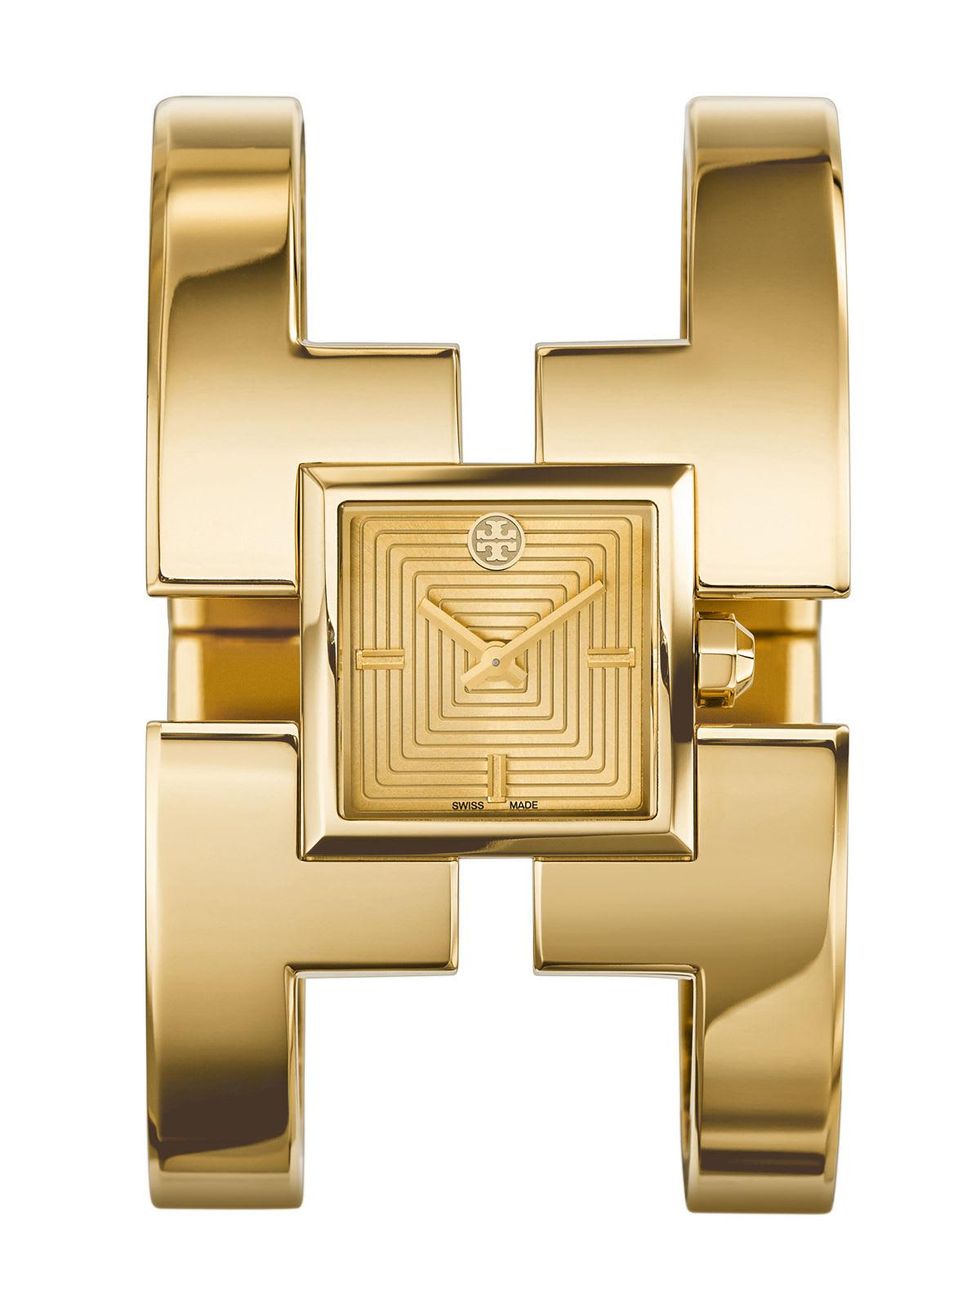 Before Domain boutique opens, take a peek at Tory Burch's unique new watch  collection - CultureMap Austin